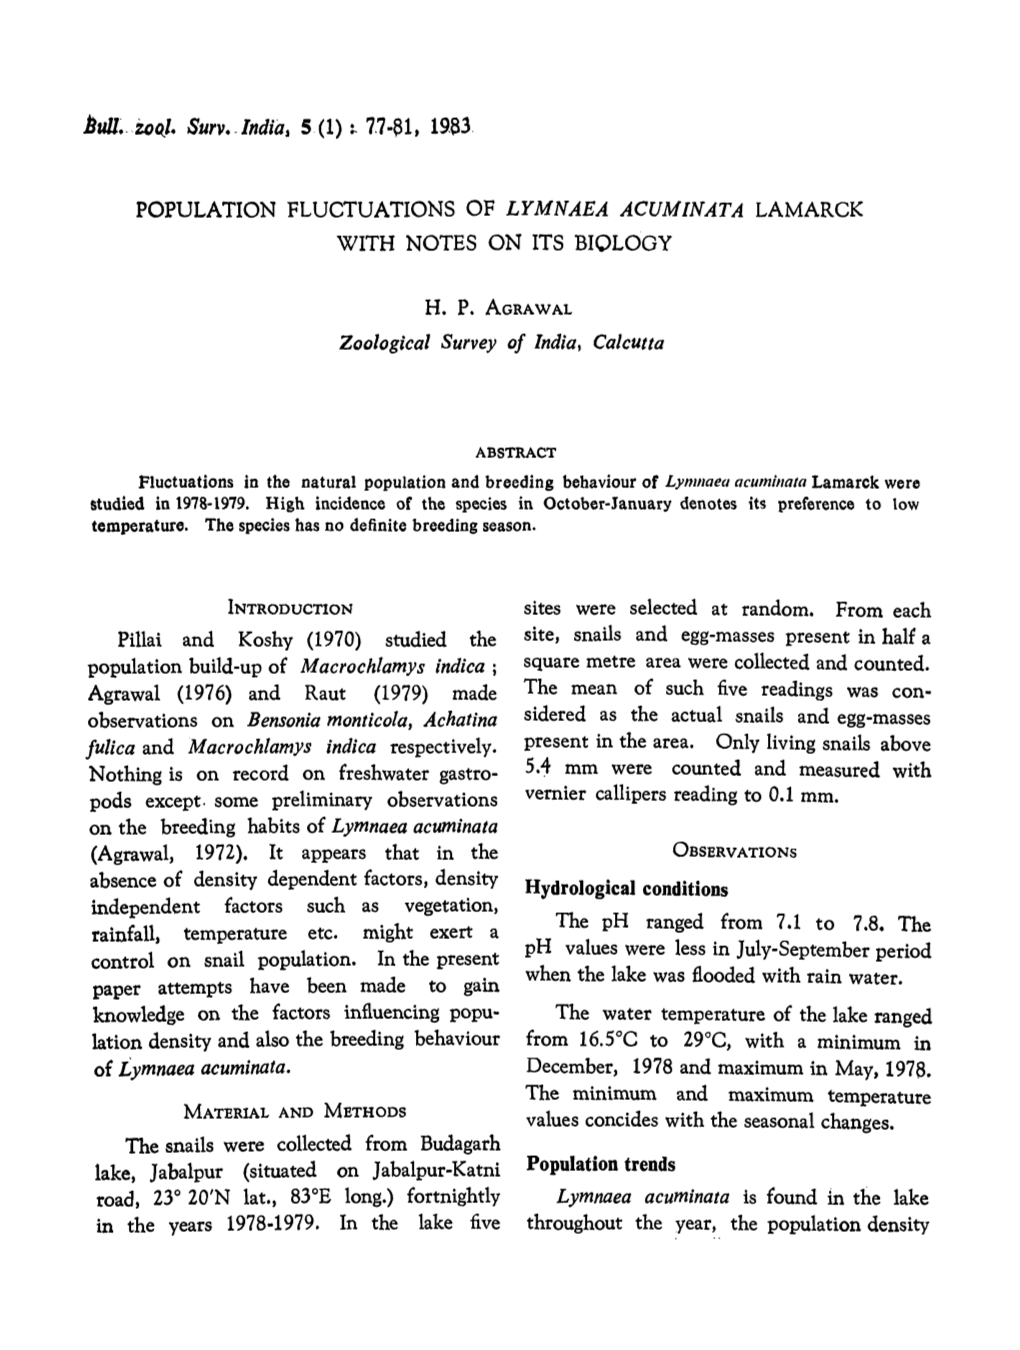 Population Fluctuations of Lymnaea Acuminata Lamarck with Notes on Its Biology